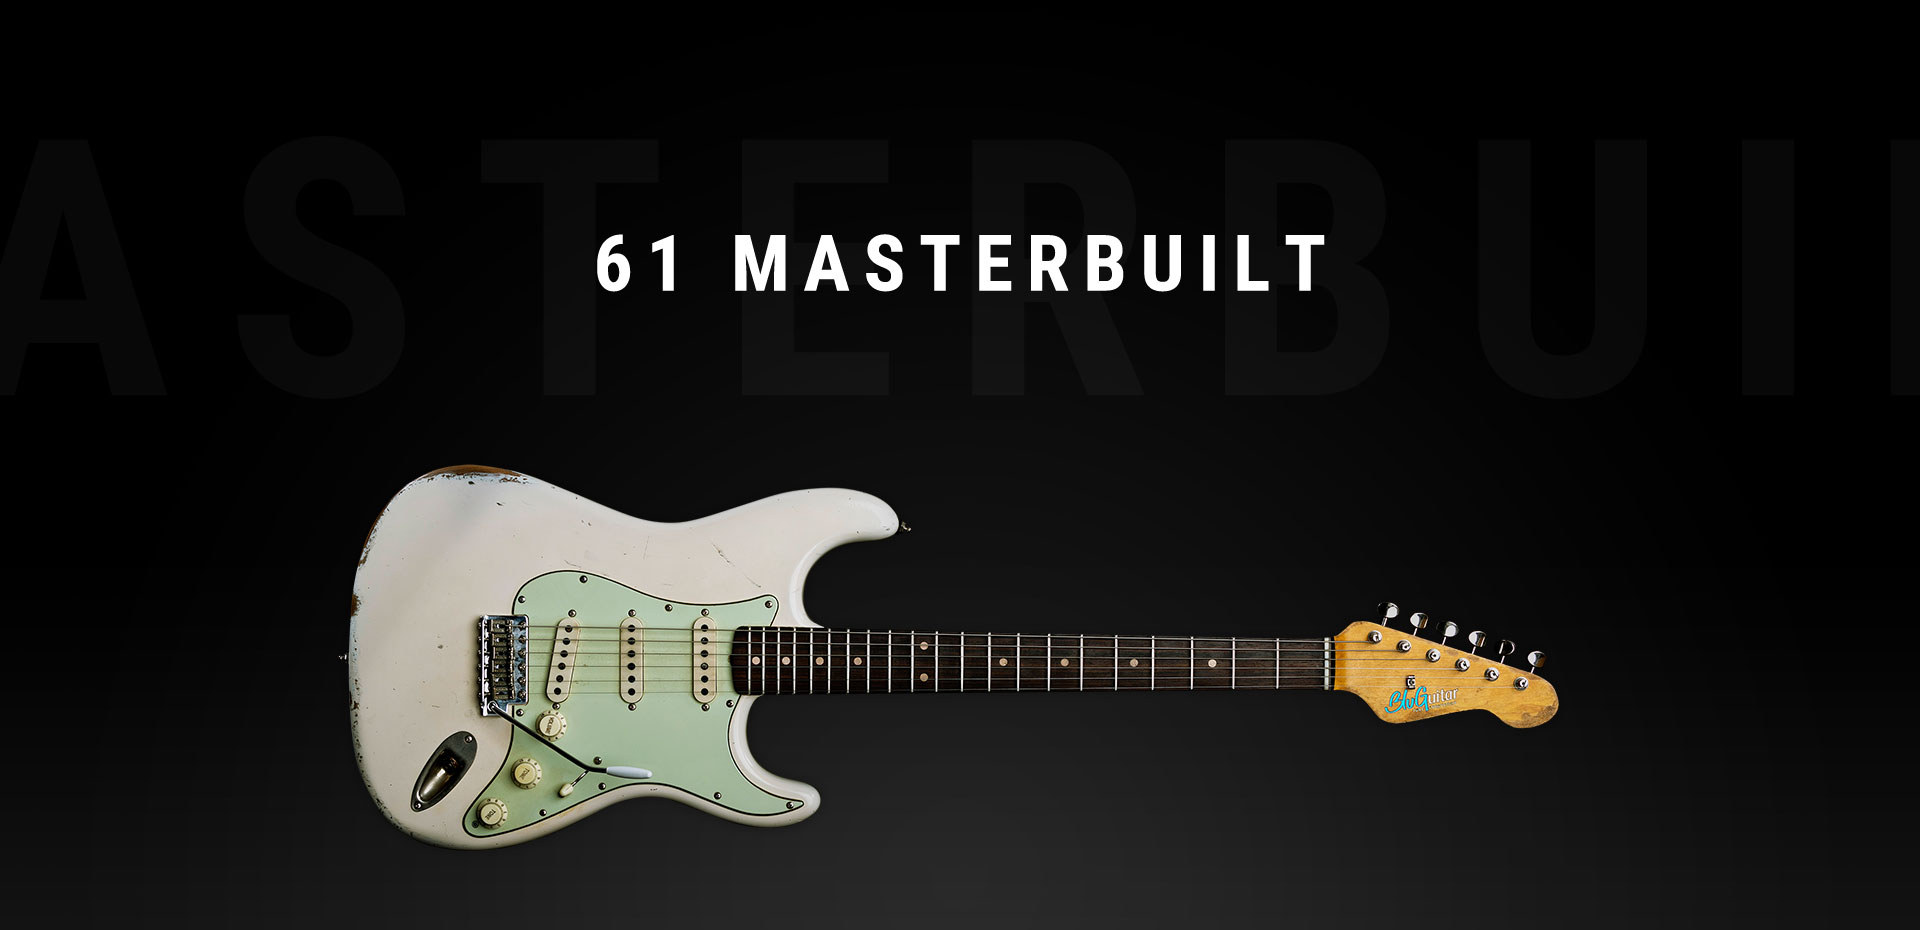 Learn more about the BluGuitar '61 Masterbuilt